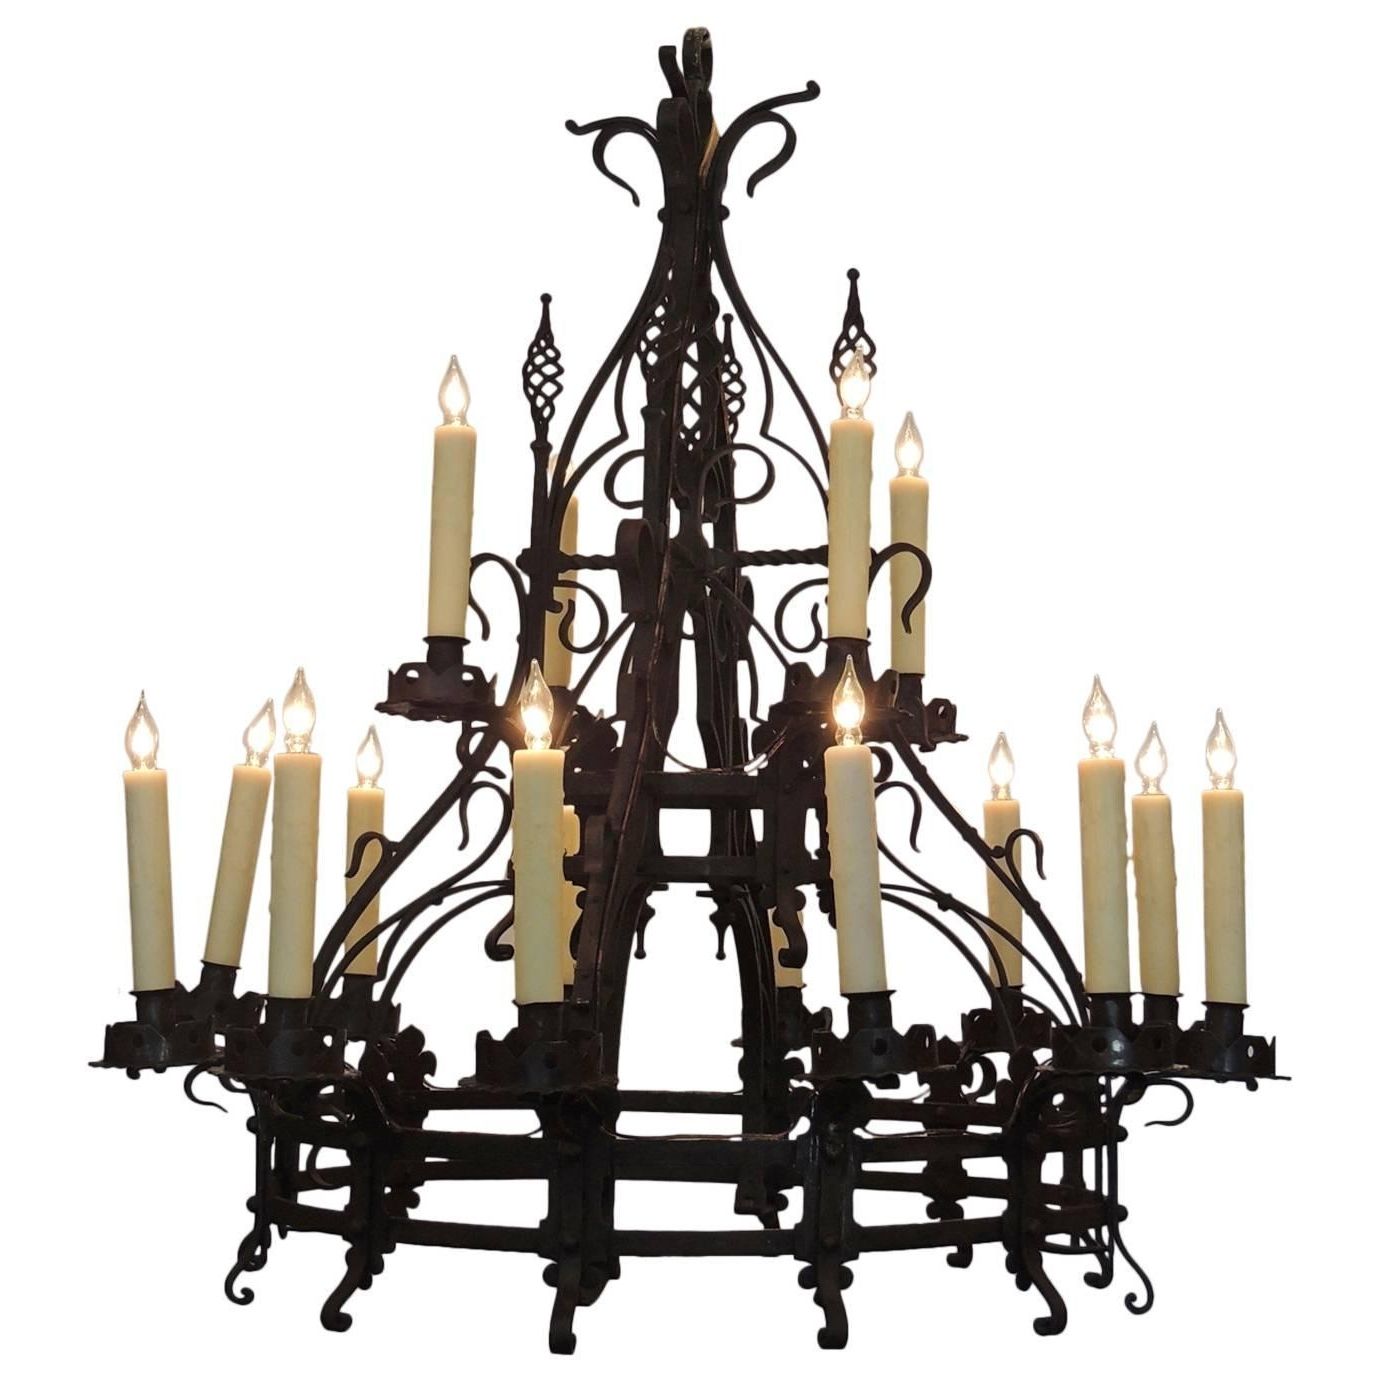 2019 Late 19th C French Gothic Wrought Iron Chandelier For Sale At 1stdibs Throughout Cast Iron Chandelier (View 2 of 20)